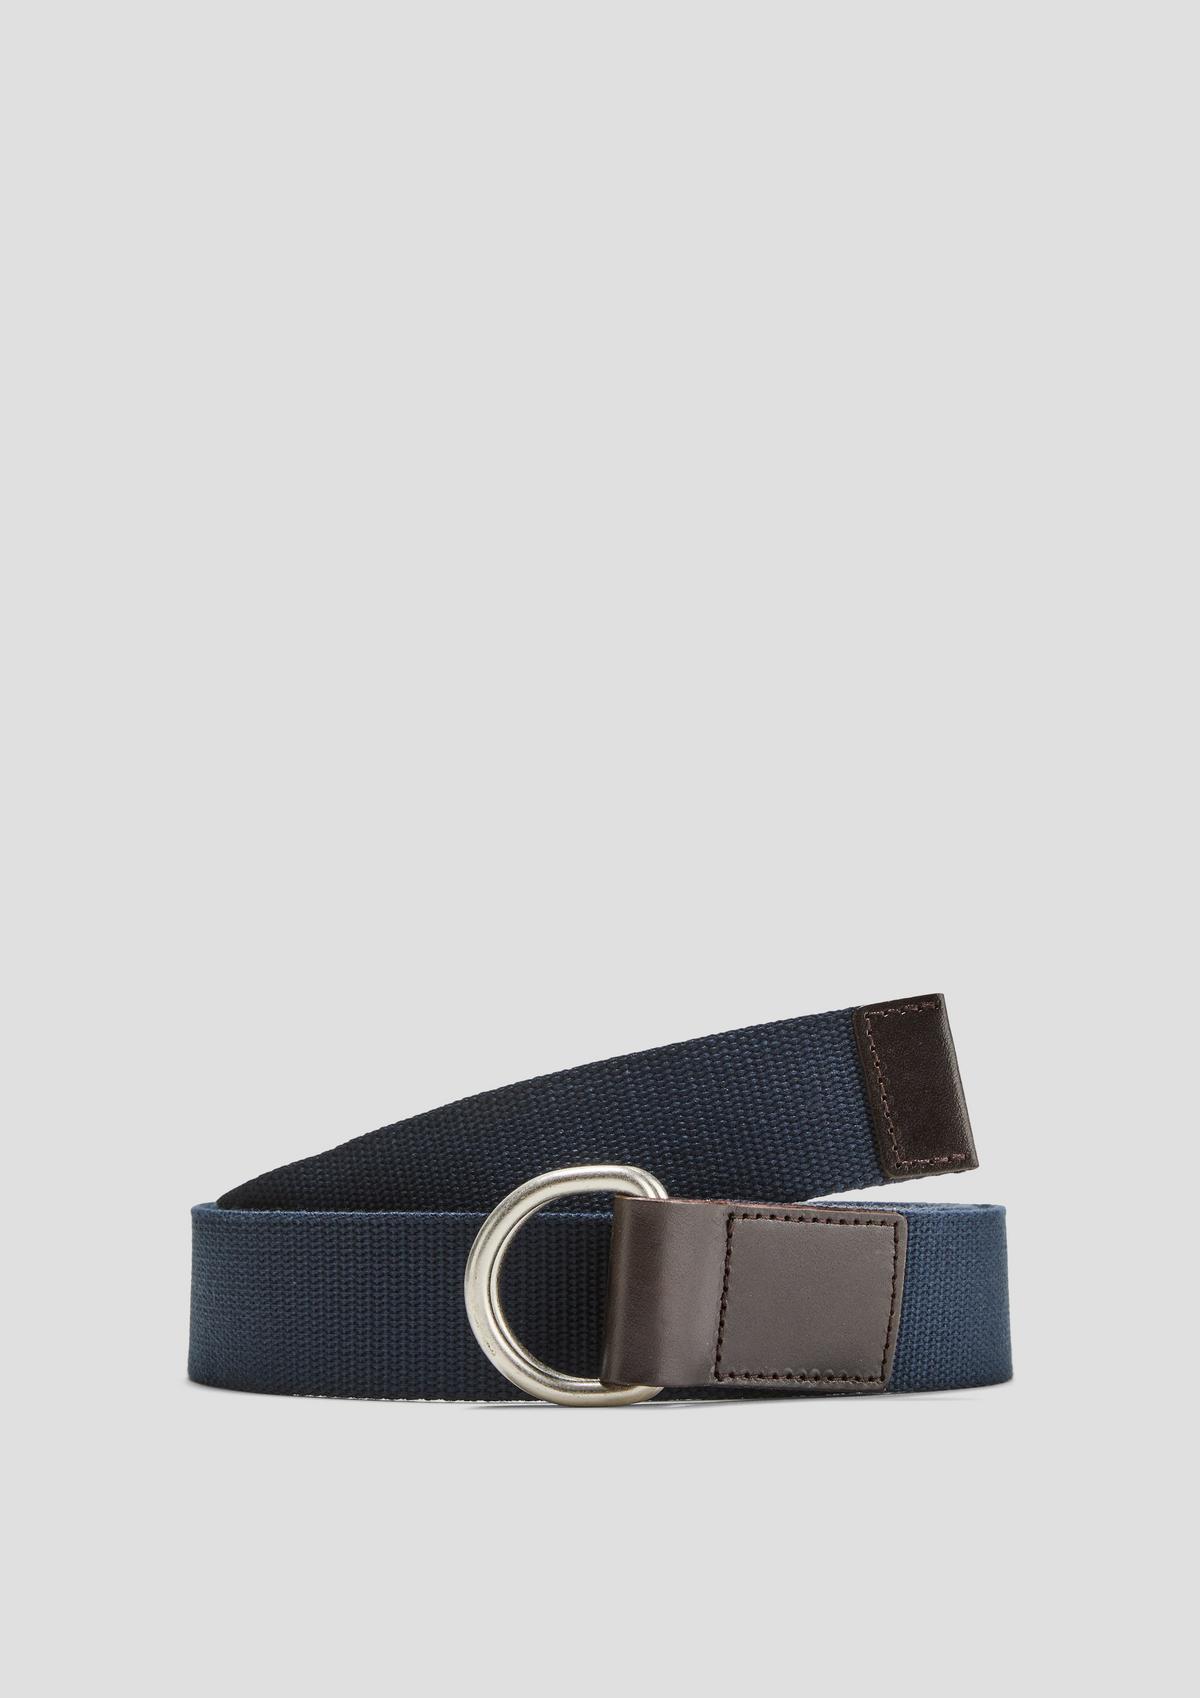 s.Oliver Canvas belt with a double D-ring buckle